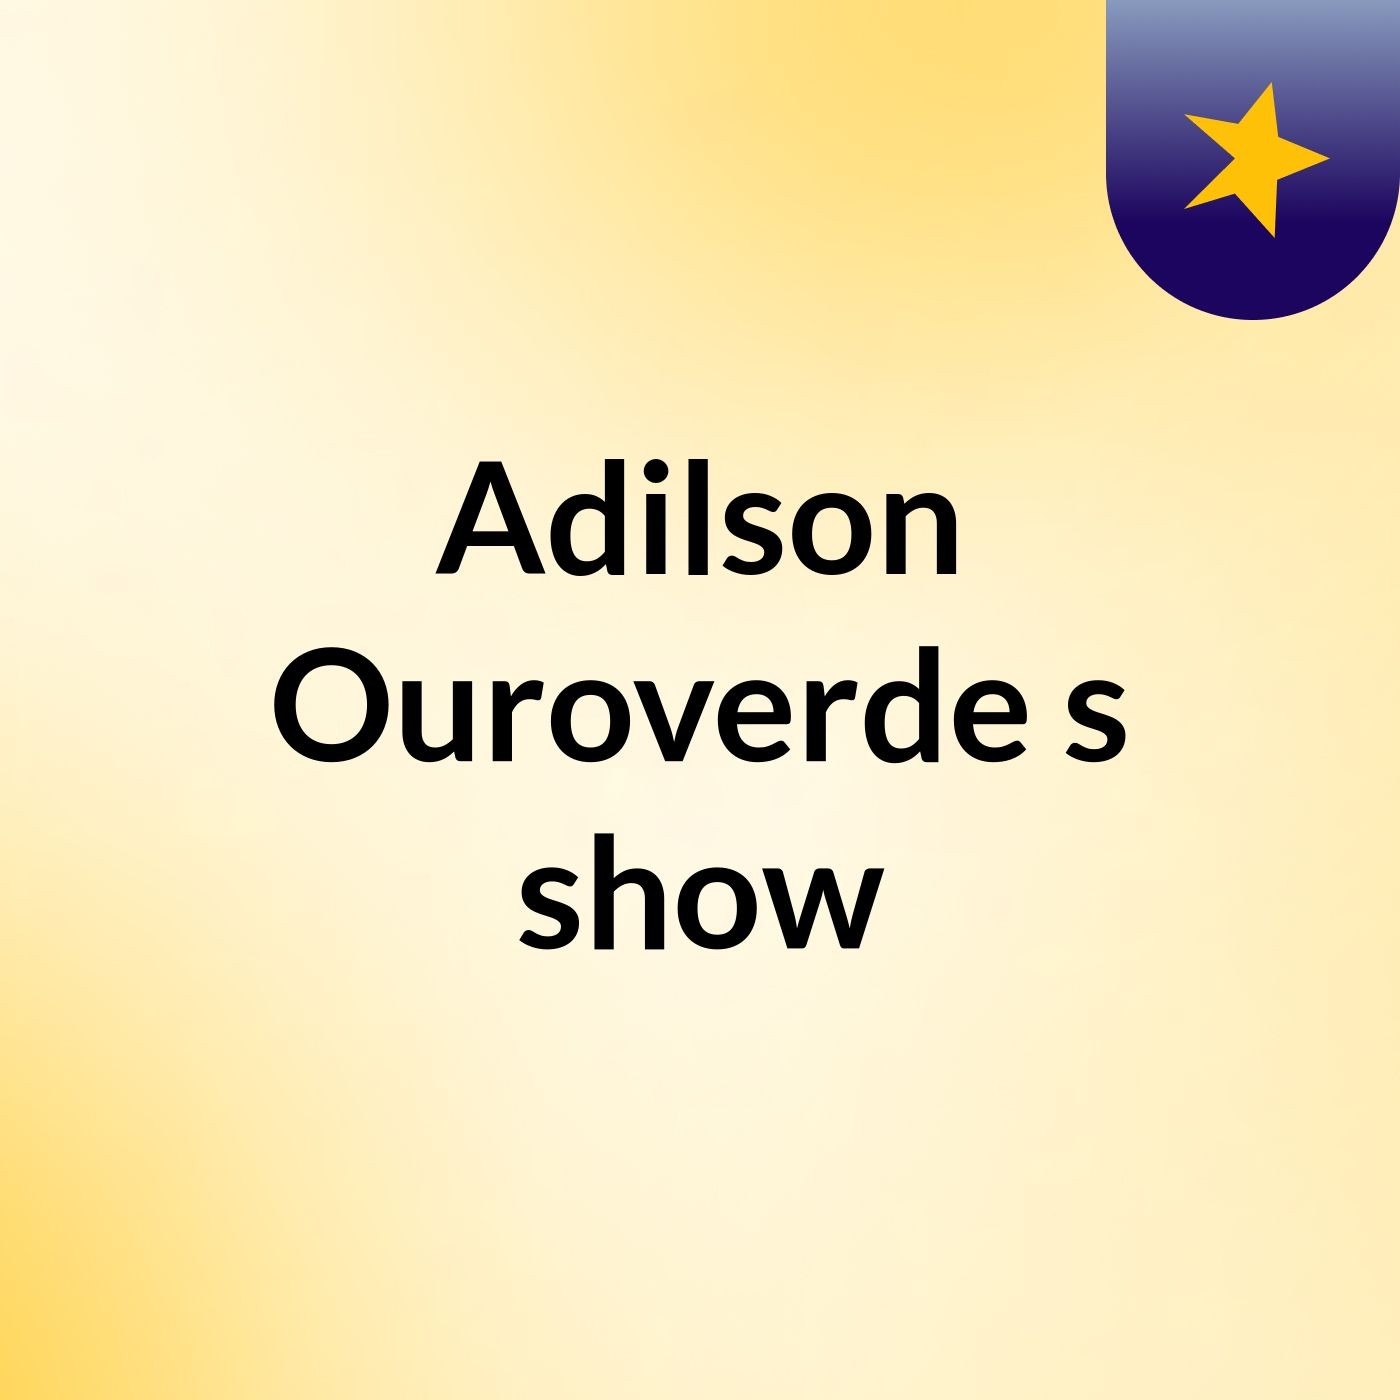 Adilson Ouroverde's show